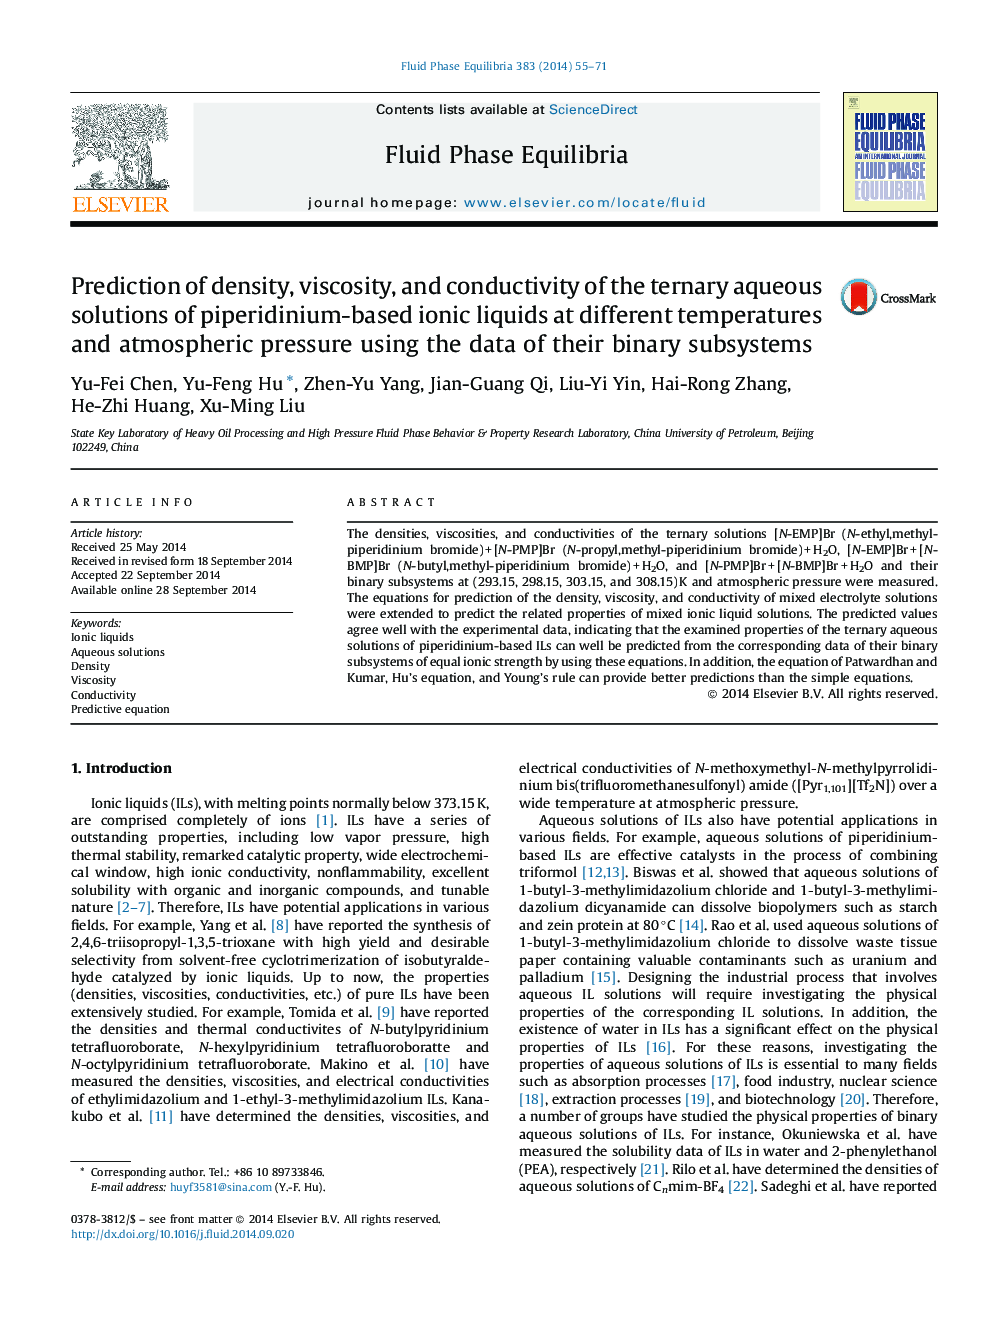 Prediction of density, viscosity, and conductivity of the ternary aqueous solutions of piperidinium-based ionic liquids at different temperatures and atmospheric pressure using the data of their binary subsystems